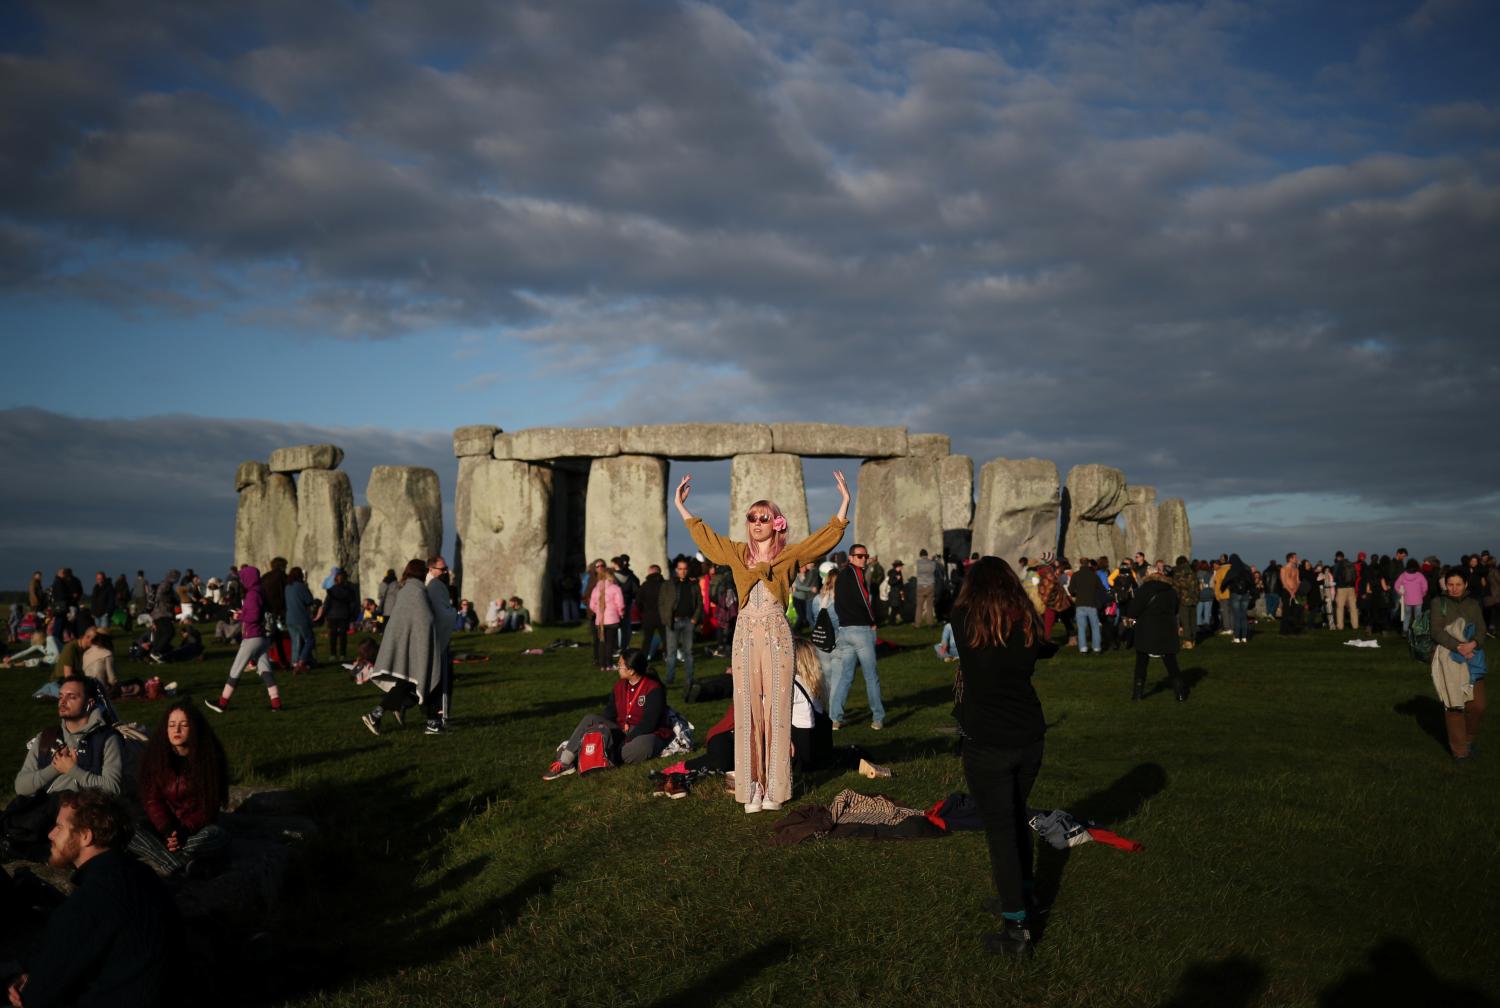 The sun rises as revellers welcome in the Summer Solstice at the Stonehenge stone circle, in Amesbury, Britain June 21, 2019. REUTERS/Hannah McKay - RC192649D5E0